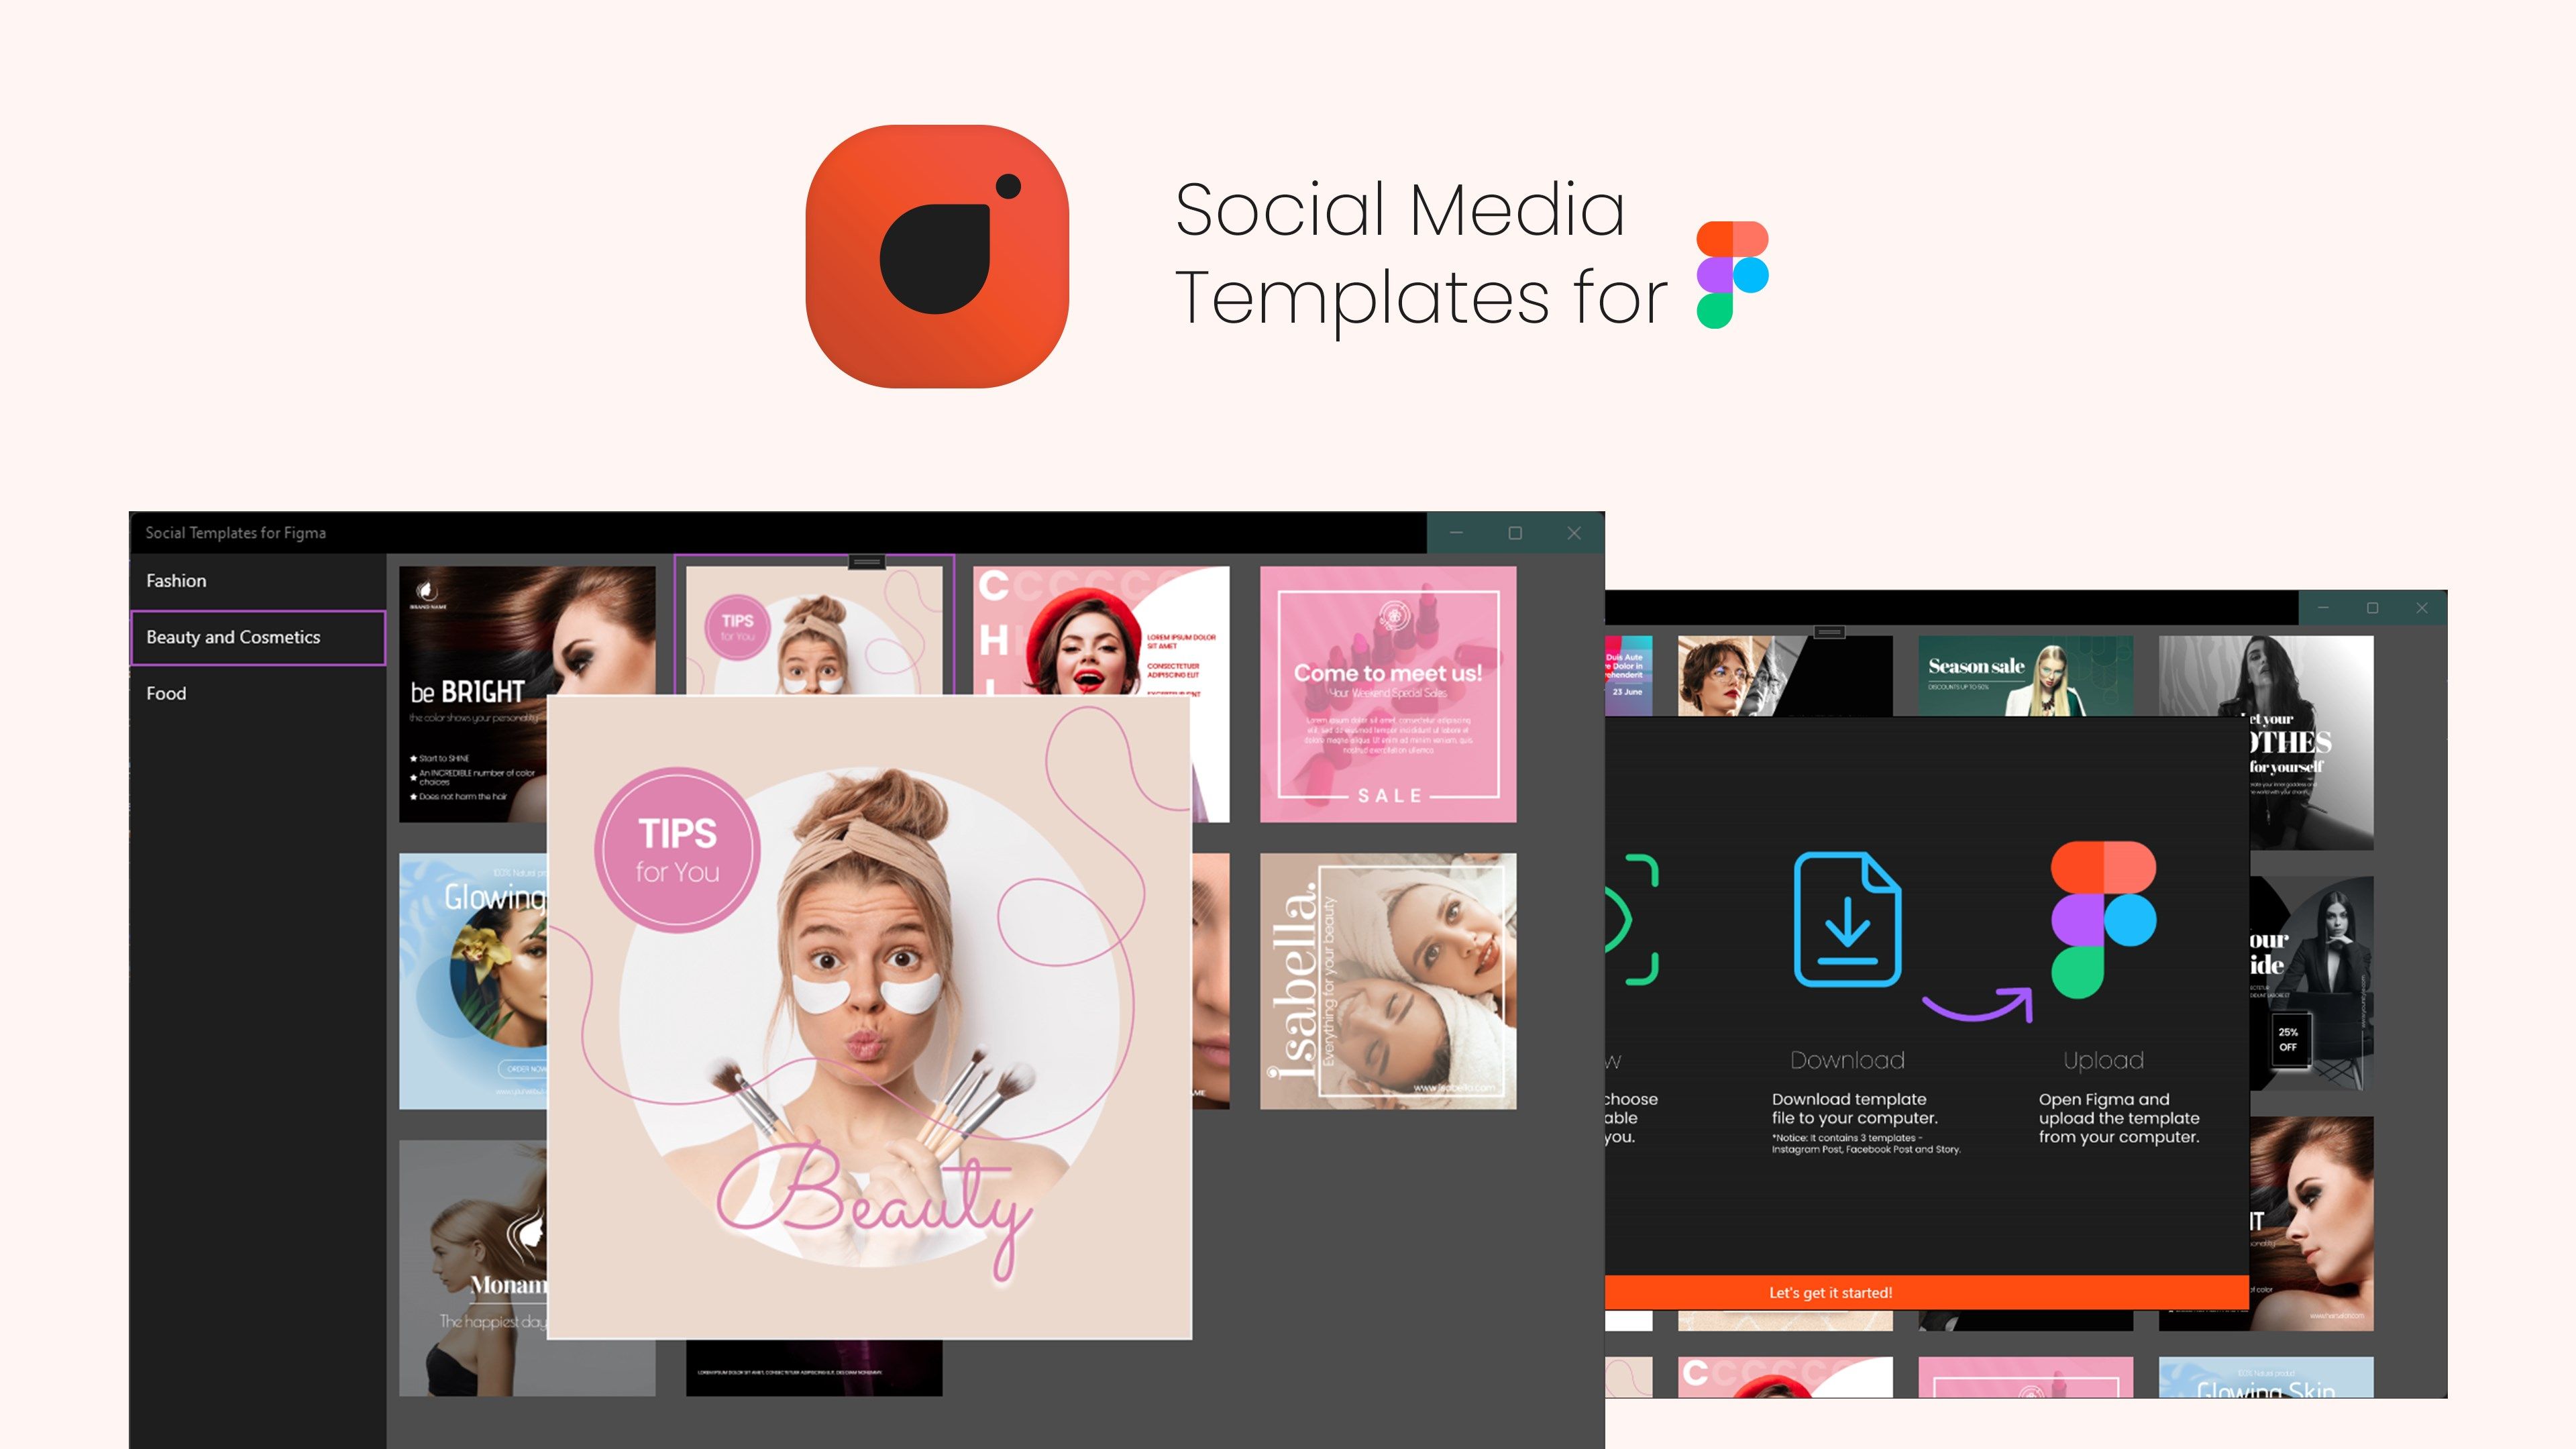 Easy to navigate and light application with 30+ templates.